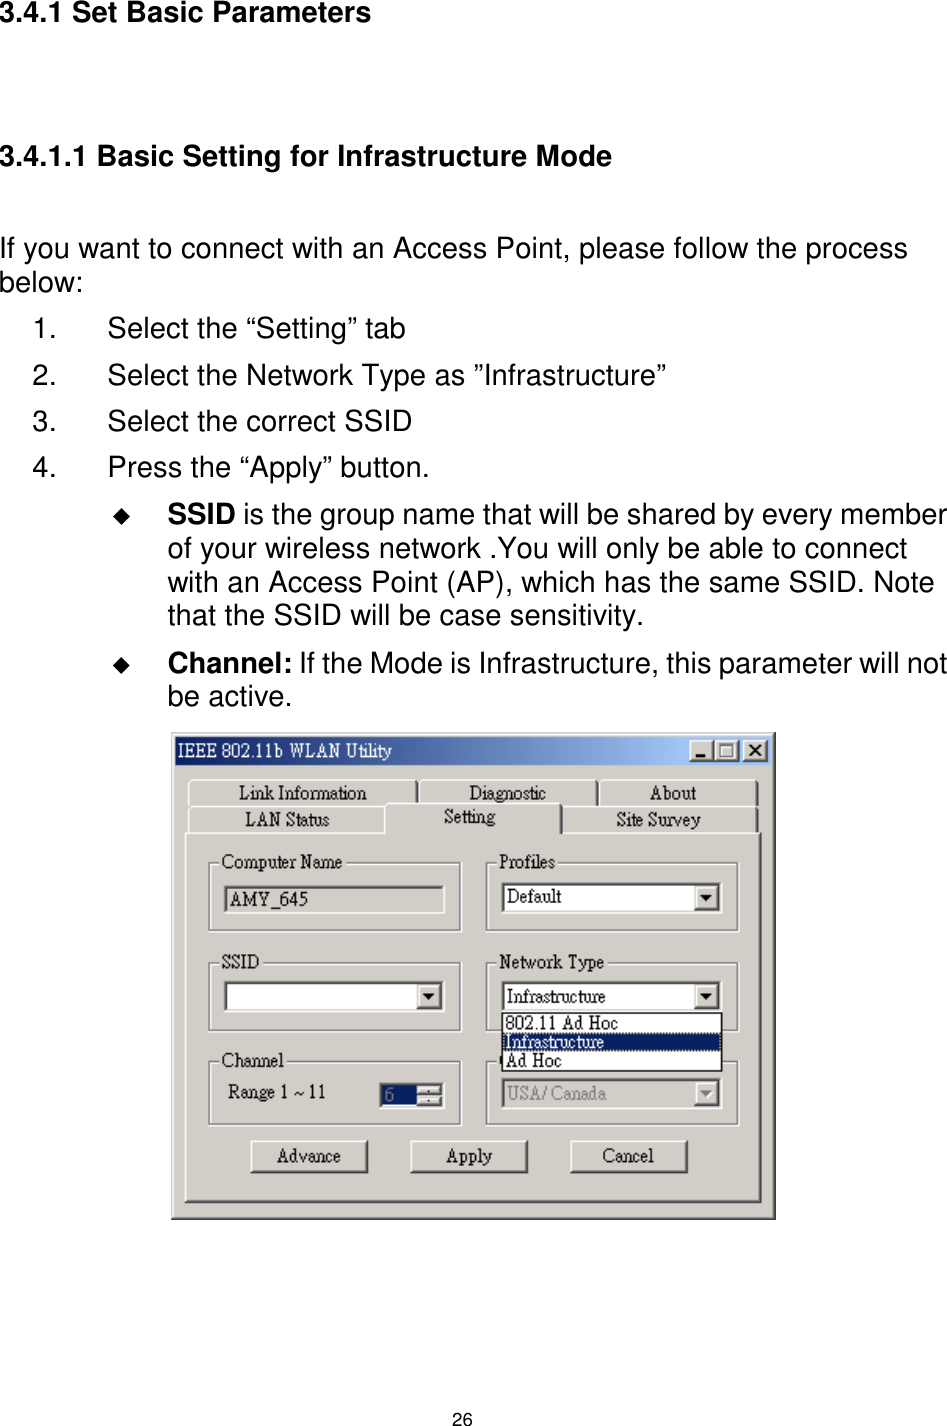  26 3.4.1 Set Basic Parameters   3.4.1.1 Basic Setting for Infrastructure Mode  If you want to connect with an Access Point, please follow the process below: 1.  Select the “Setting” tab 2.  Select the Network Type as ”Infrastructure” 3.  Select the correct SSID 4.  Press the “Apply” button. $  SSID is the group name that will be shared by every member of your wireless network .You will only be able to connect with an Access Point (AP), which has the same SSID. Note that the SSID will be case sensitivity. $  Channel: If the Mode is Infrastructure, this parameter will not be active.            